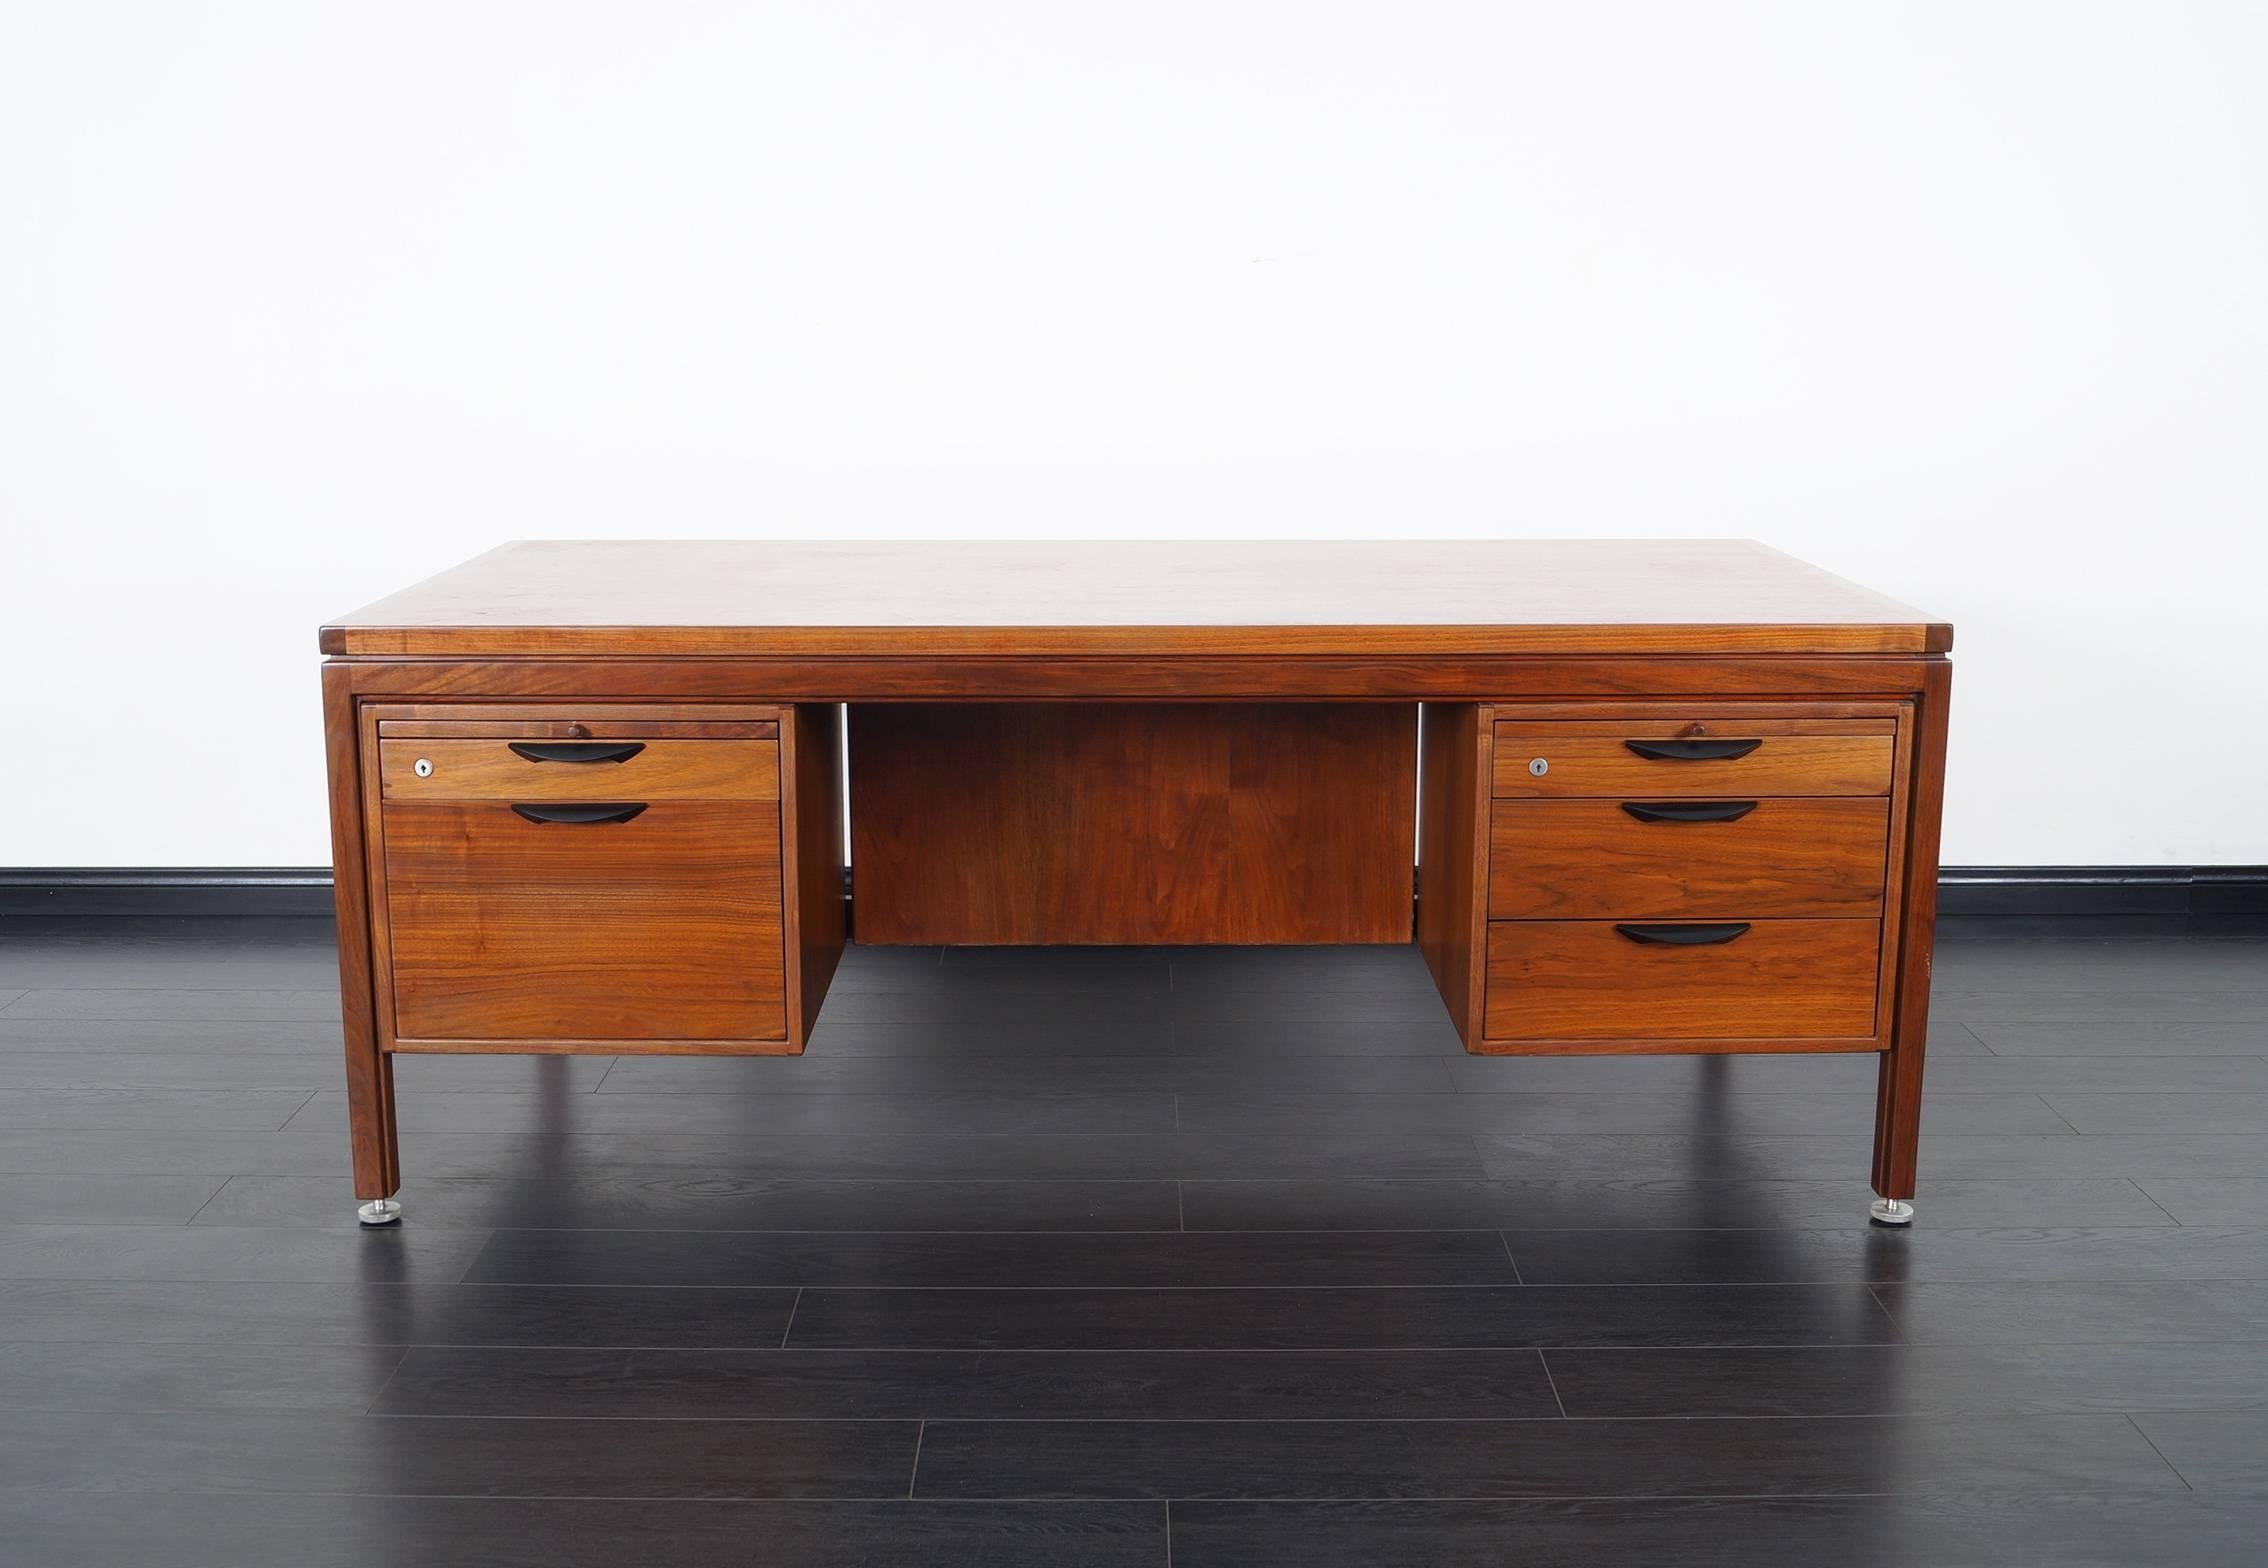 Fabulous midcentury executive desk designed by Jens Risom for Risom Design. Features gorgeous walnut grain and original black sculpted handles. It offers four pull out drawers and one file drawer.